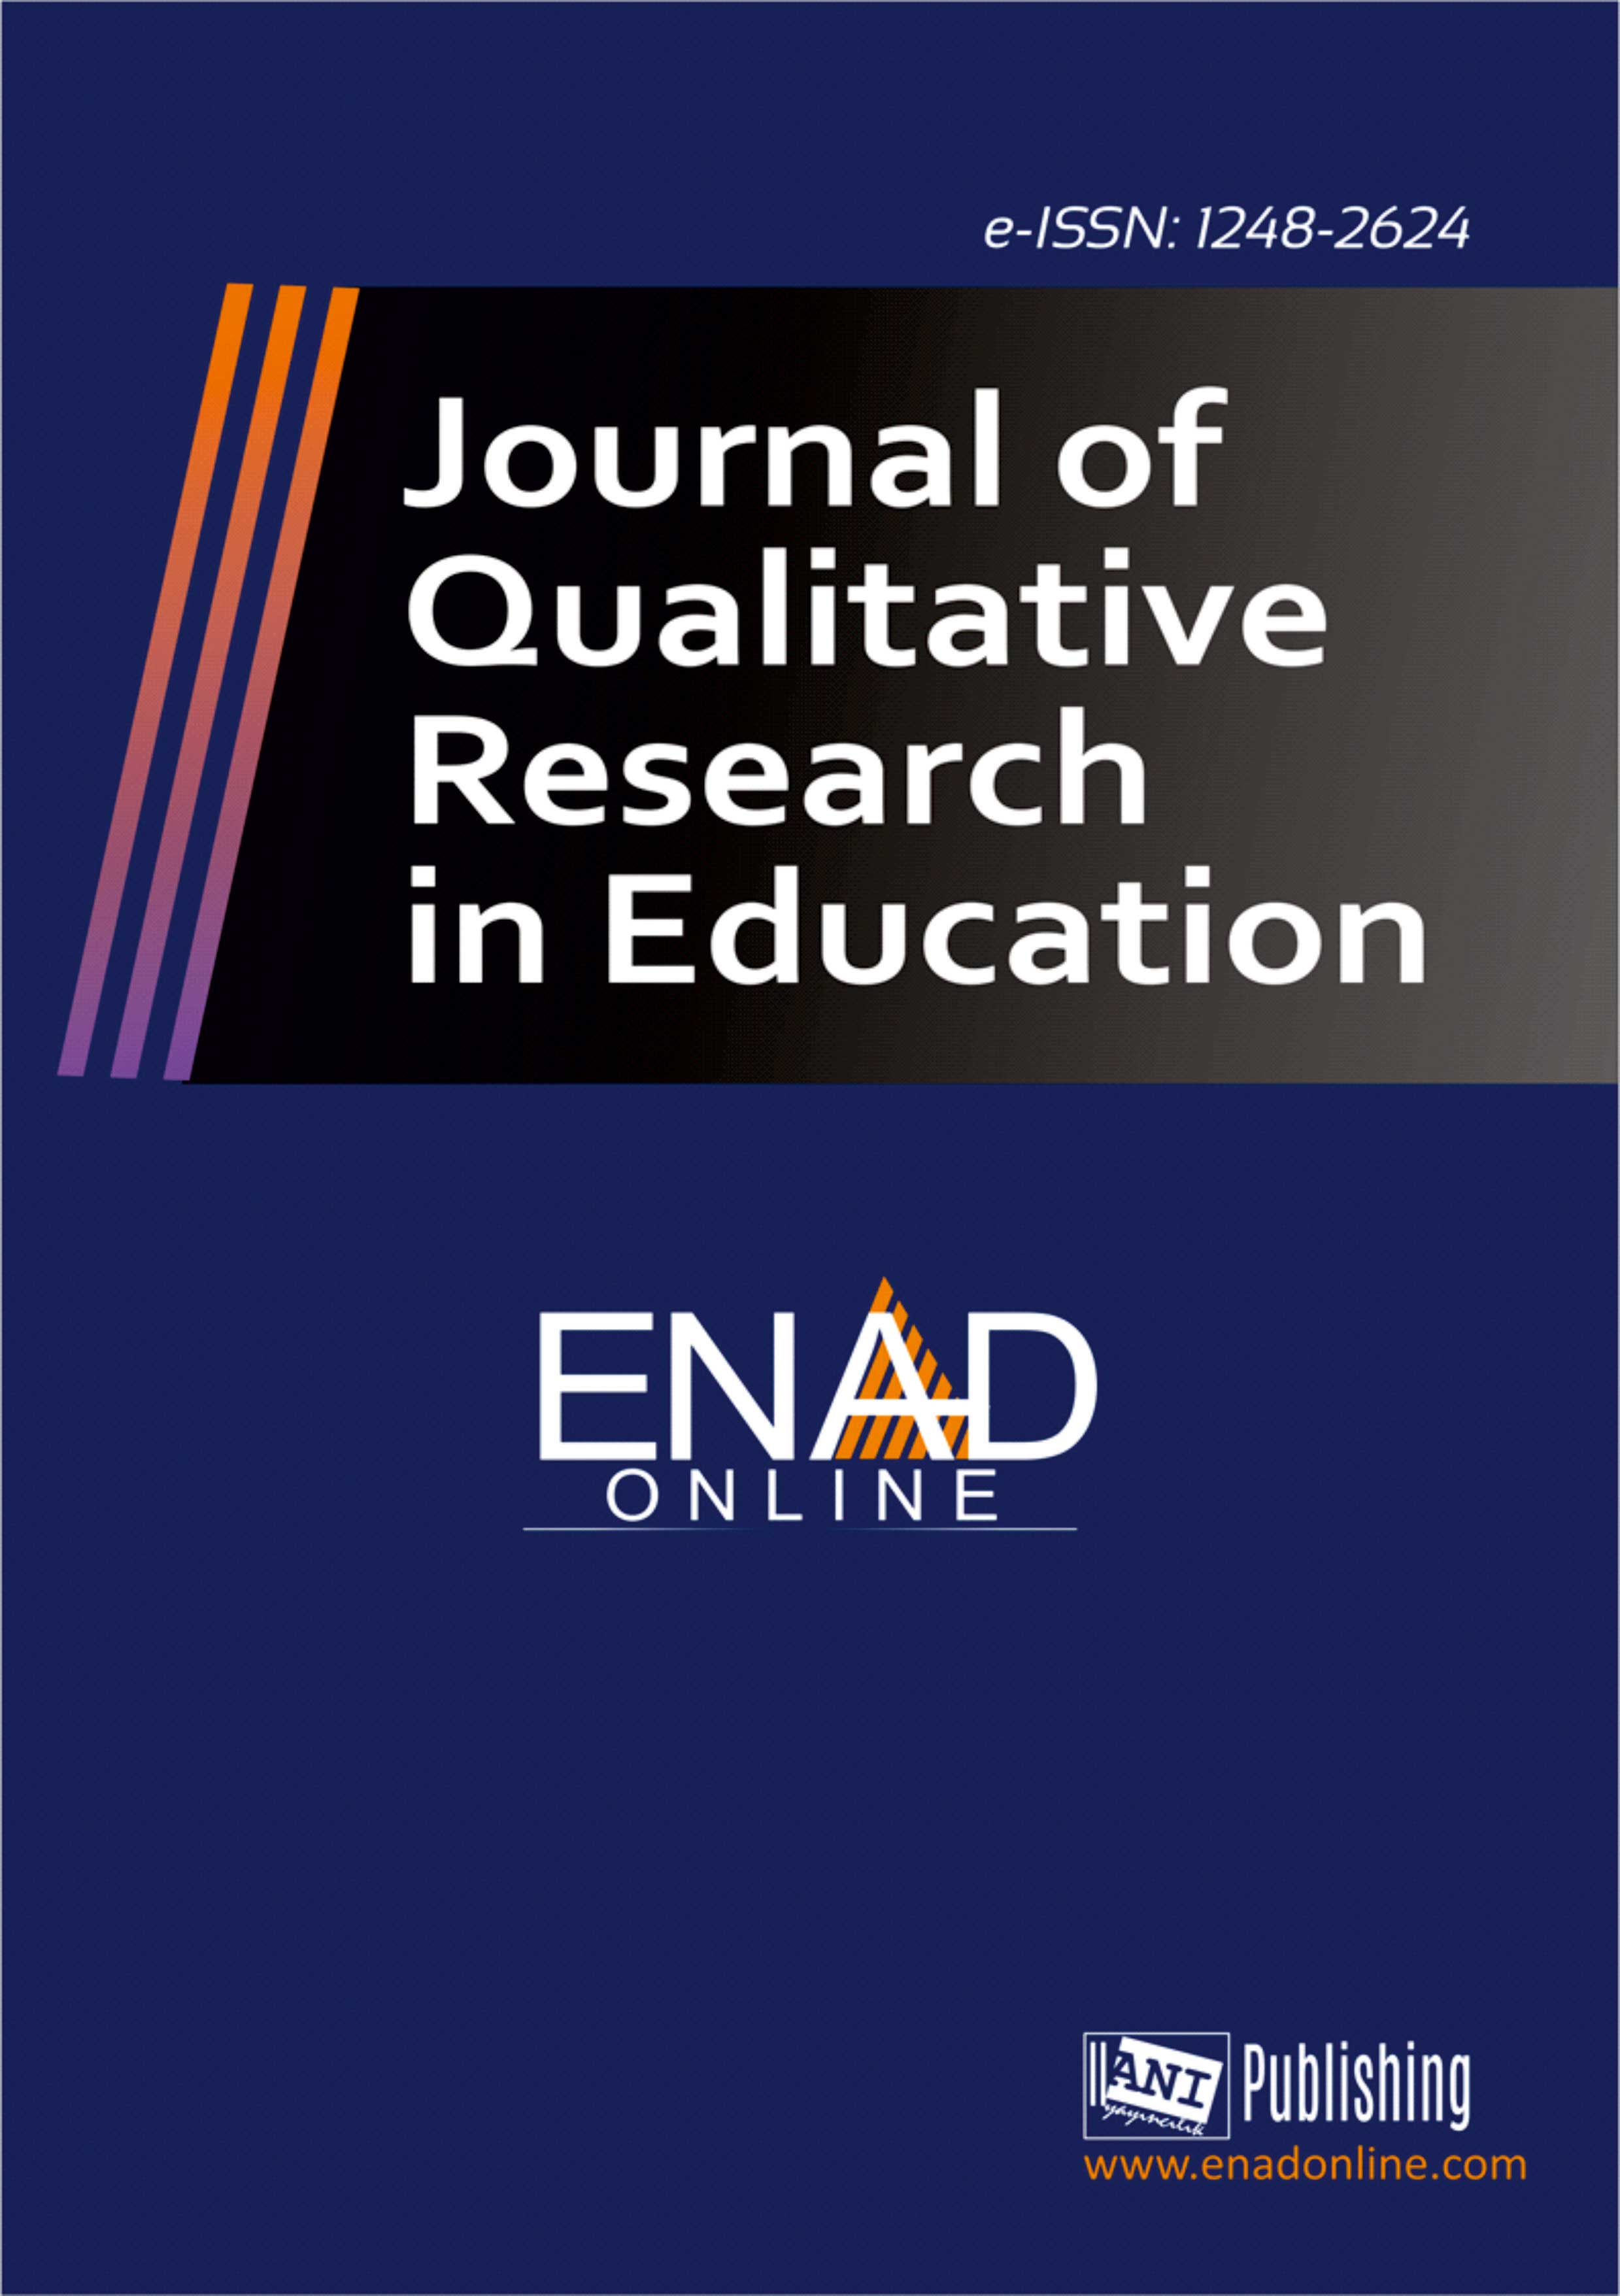 					View Issue 25 (2021):  Journal of Qualitative Research in Education
				